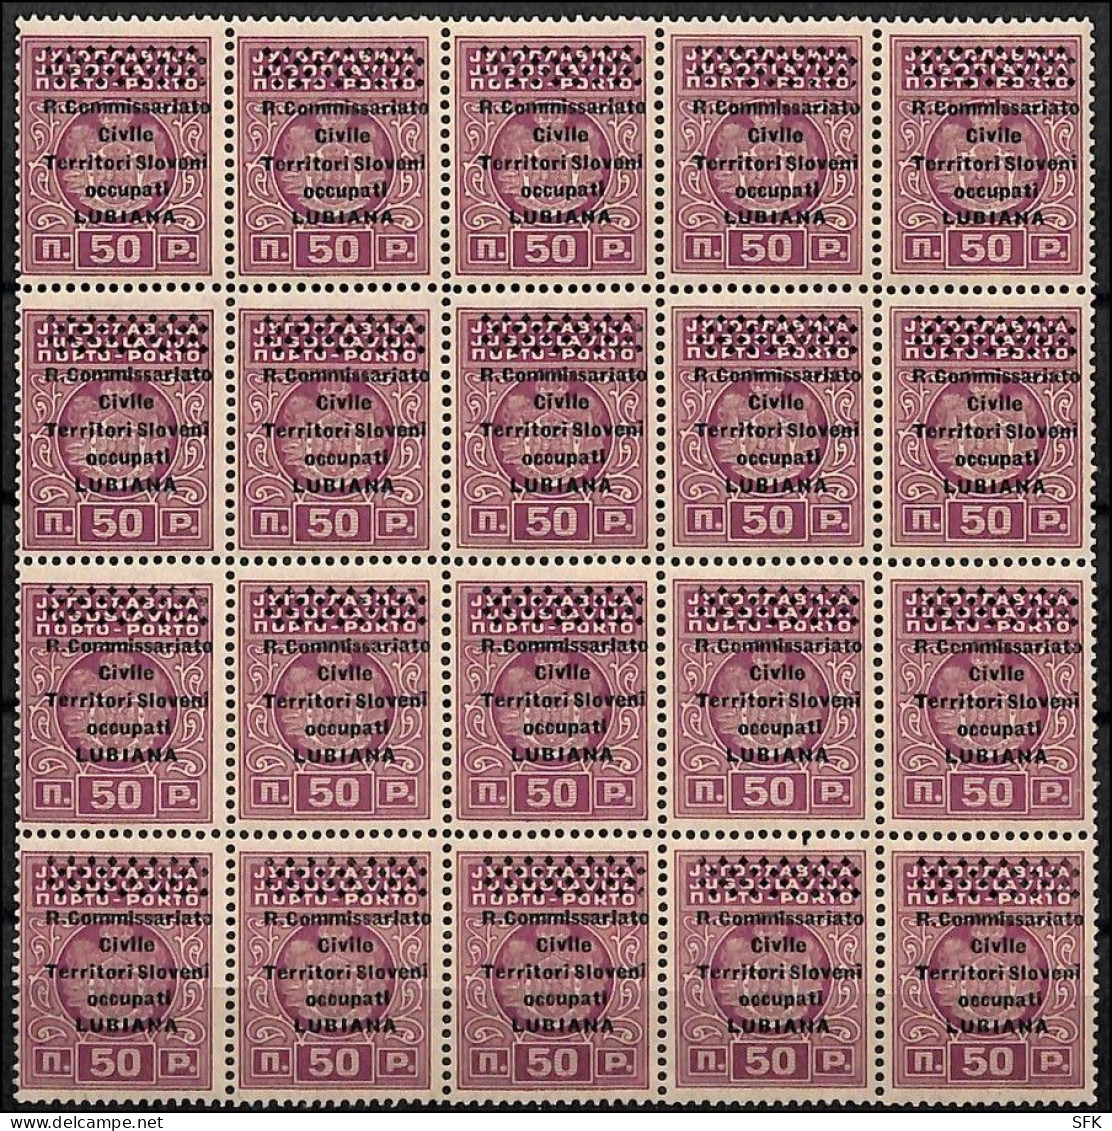 1941 Block Of Twenty Postage Due Stamps With R. Commisariato Civile...MNH - Lubiana